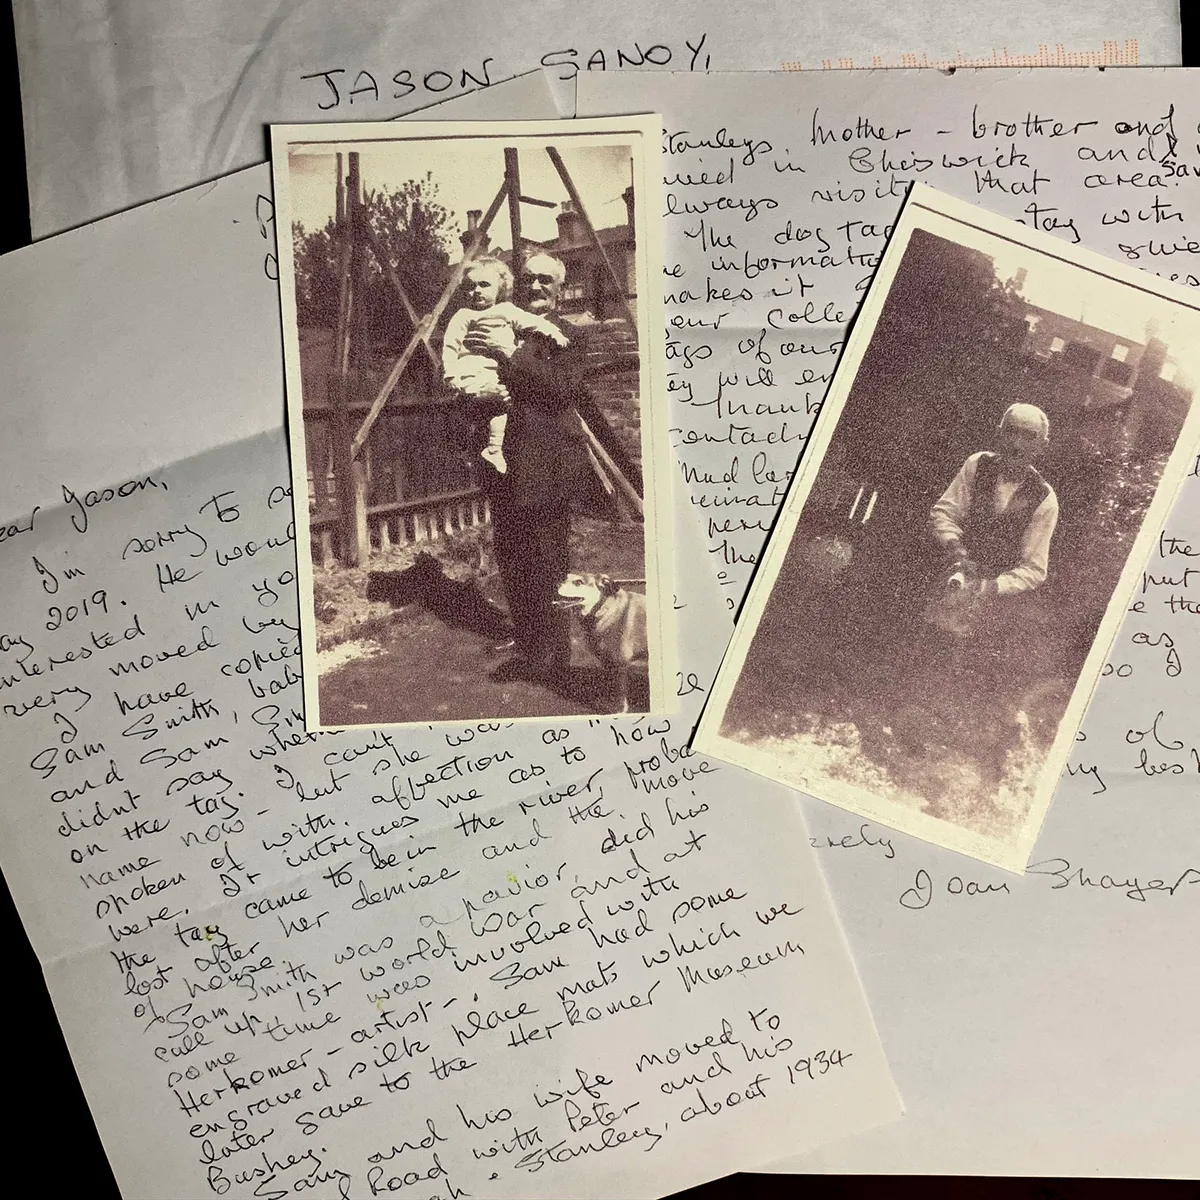 The letter from Joan Shayers, with an old photograph of Samuel Smith, Peter Shayers and the dog